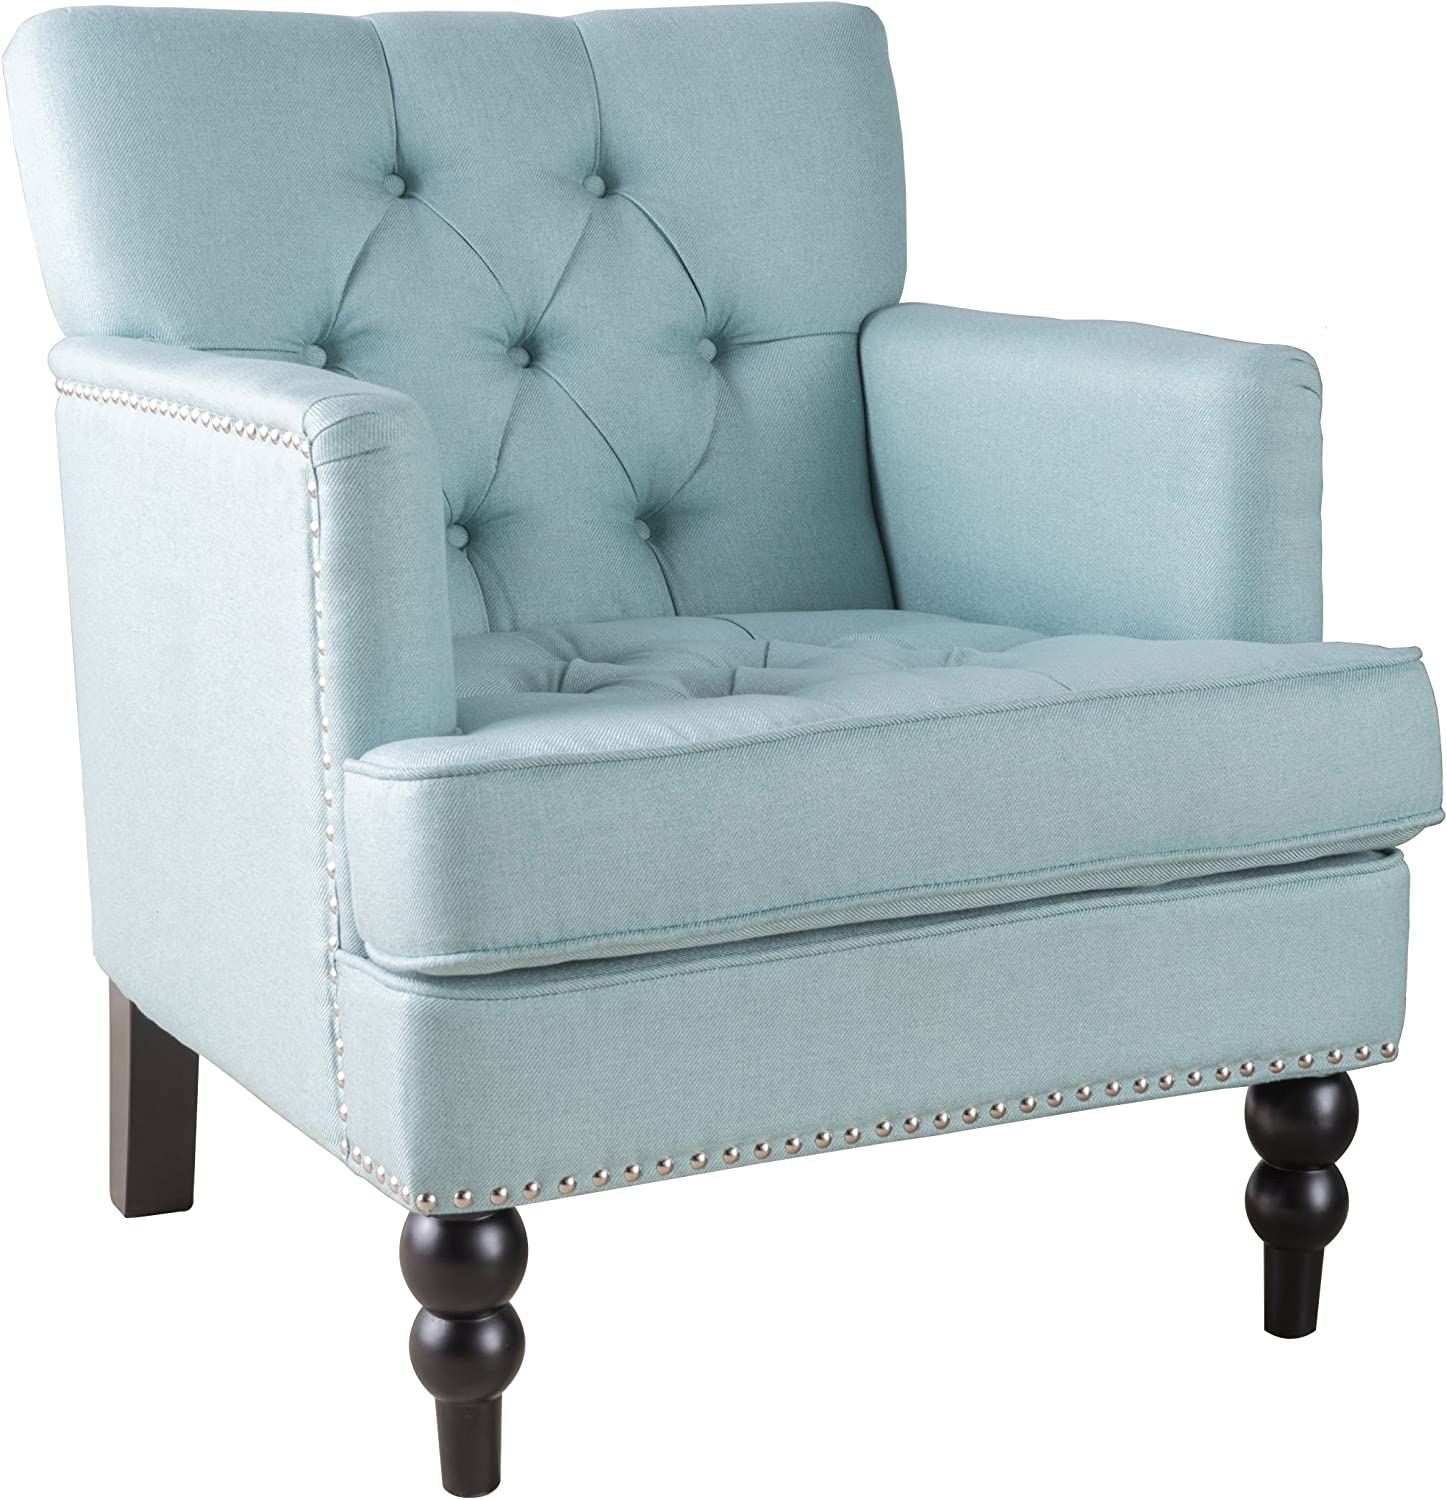 Christopher Knight Home Malone Fabric Club Chair - Light Blue